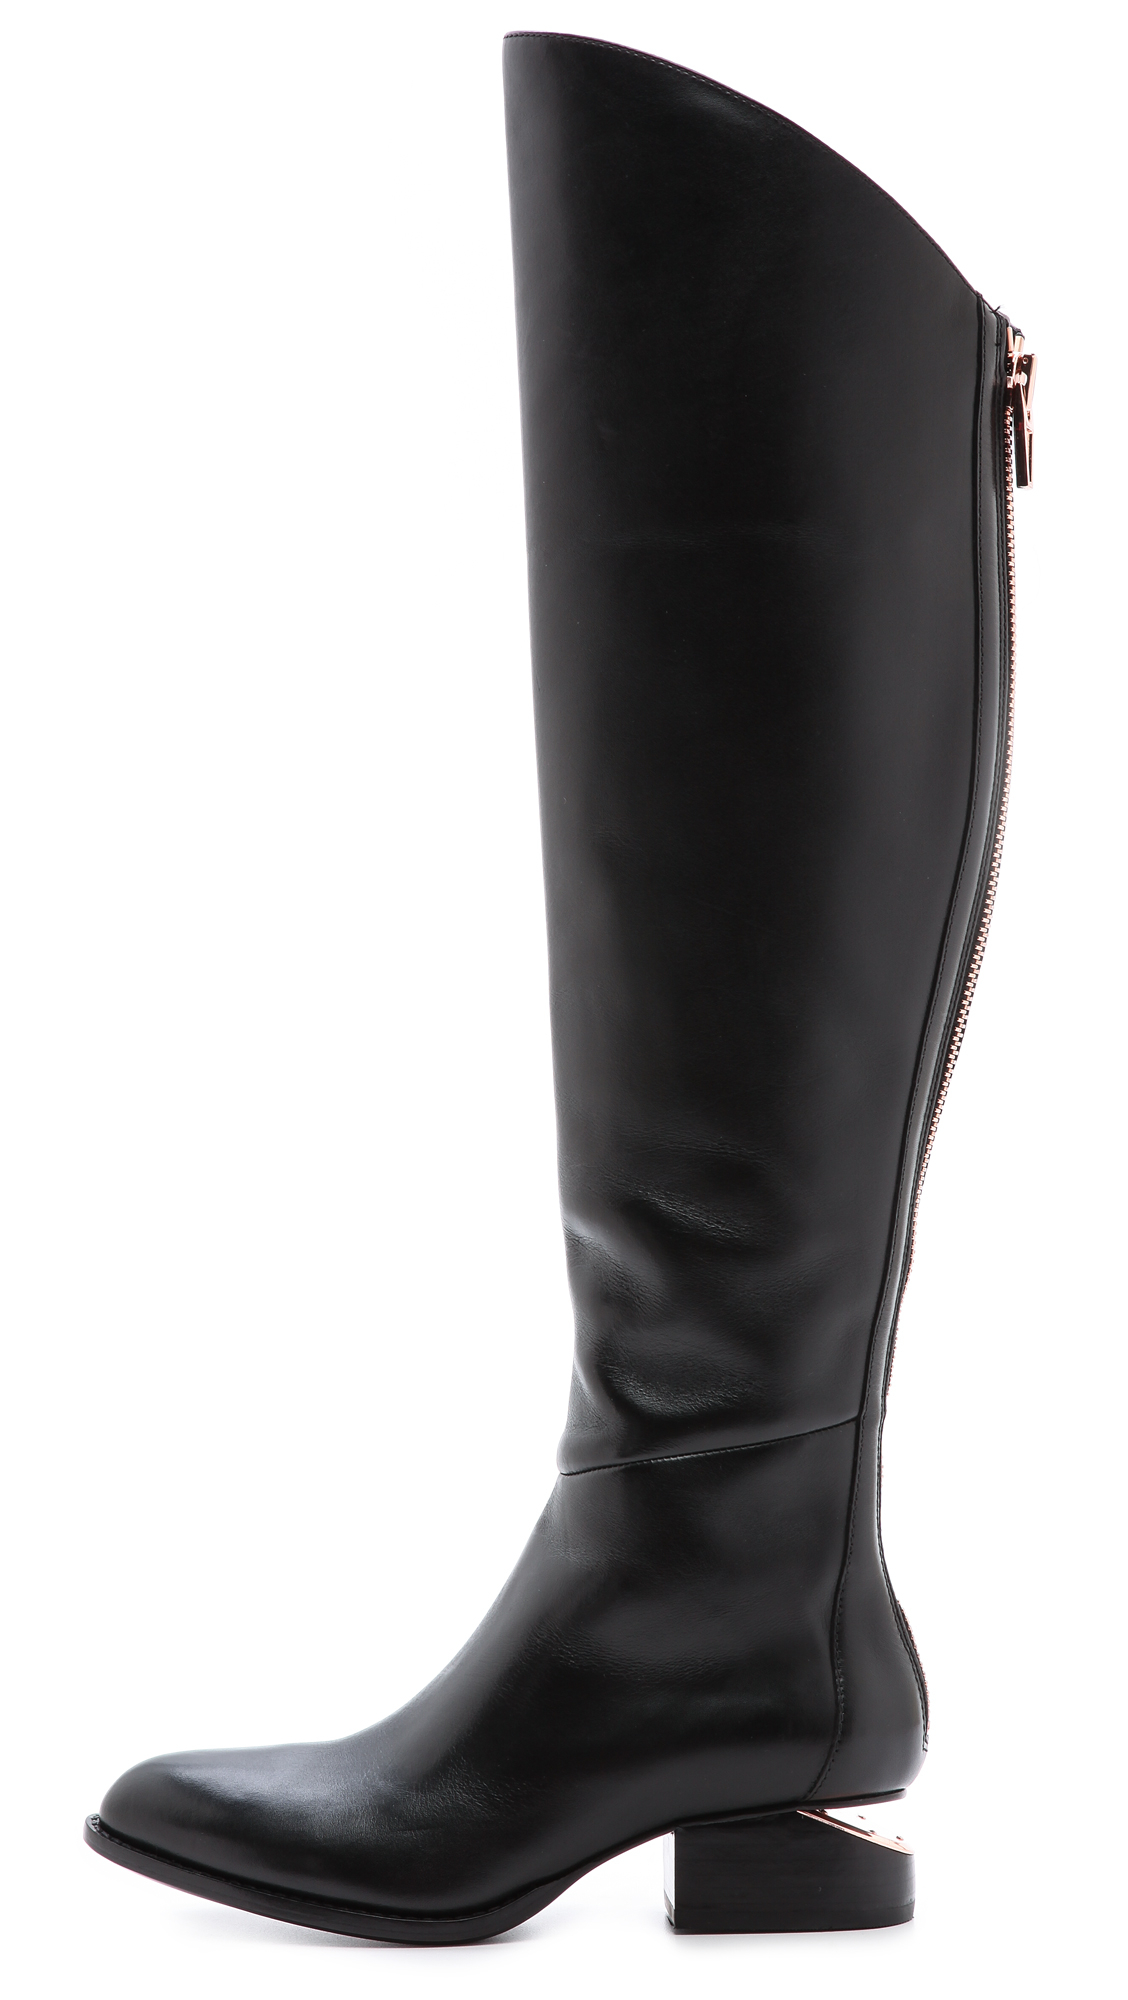 Alexander Wang Sigrid Tall Boots with Rose Gold Hardware Black | Lyst